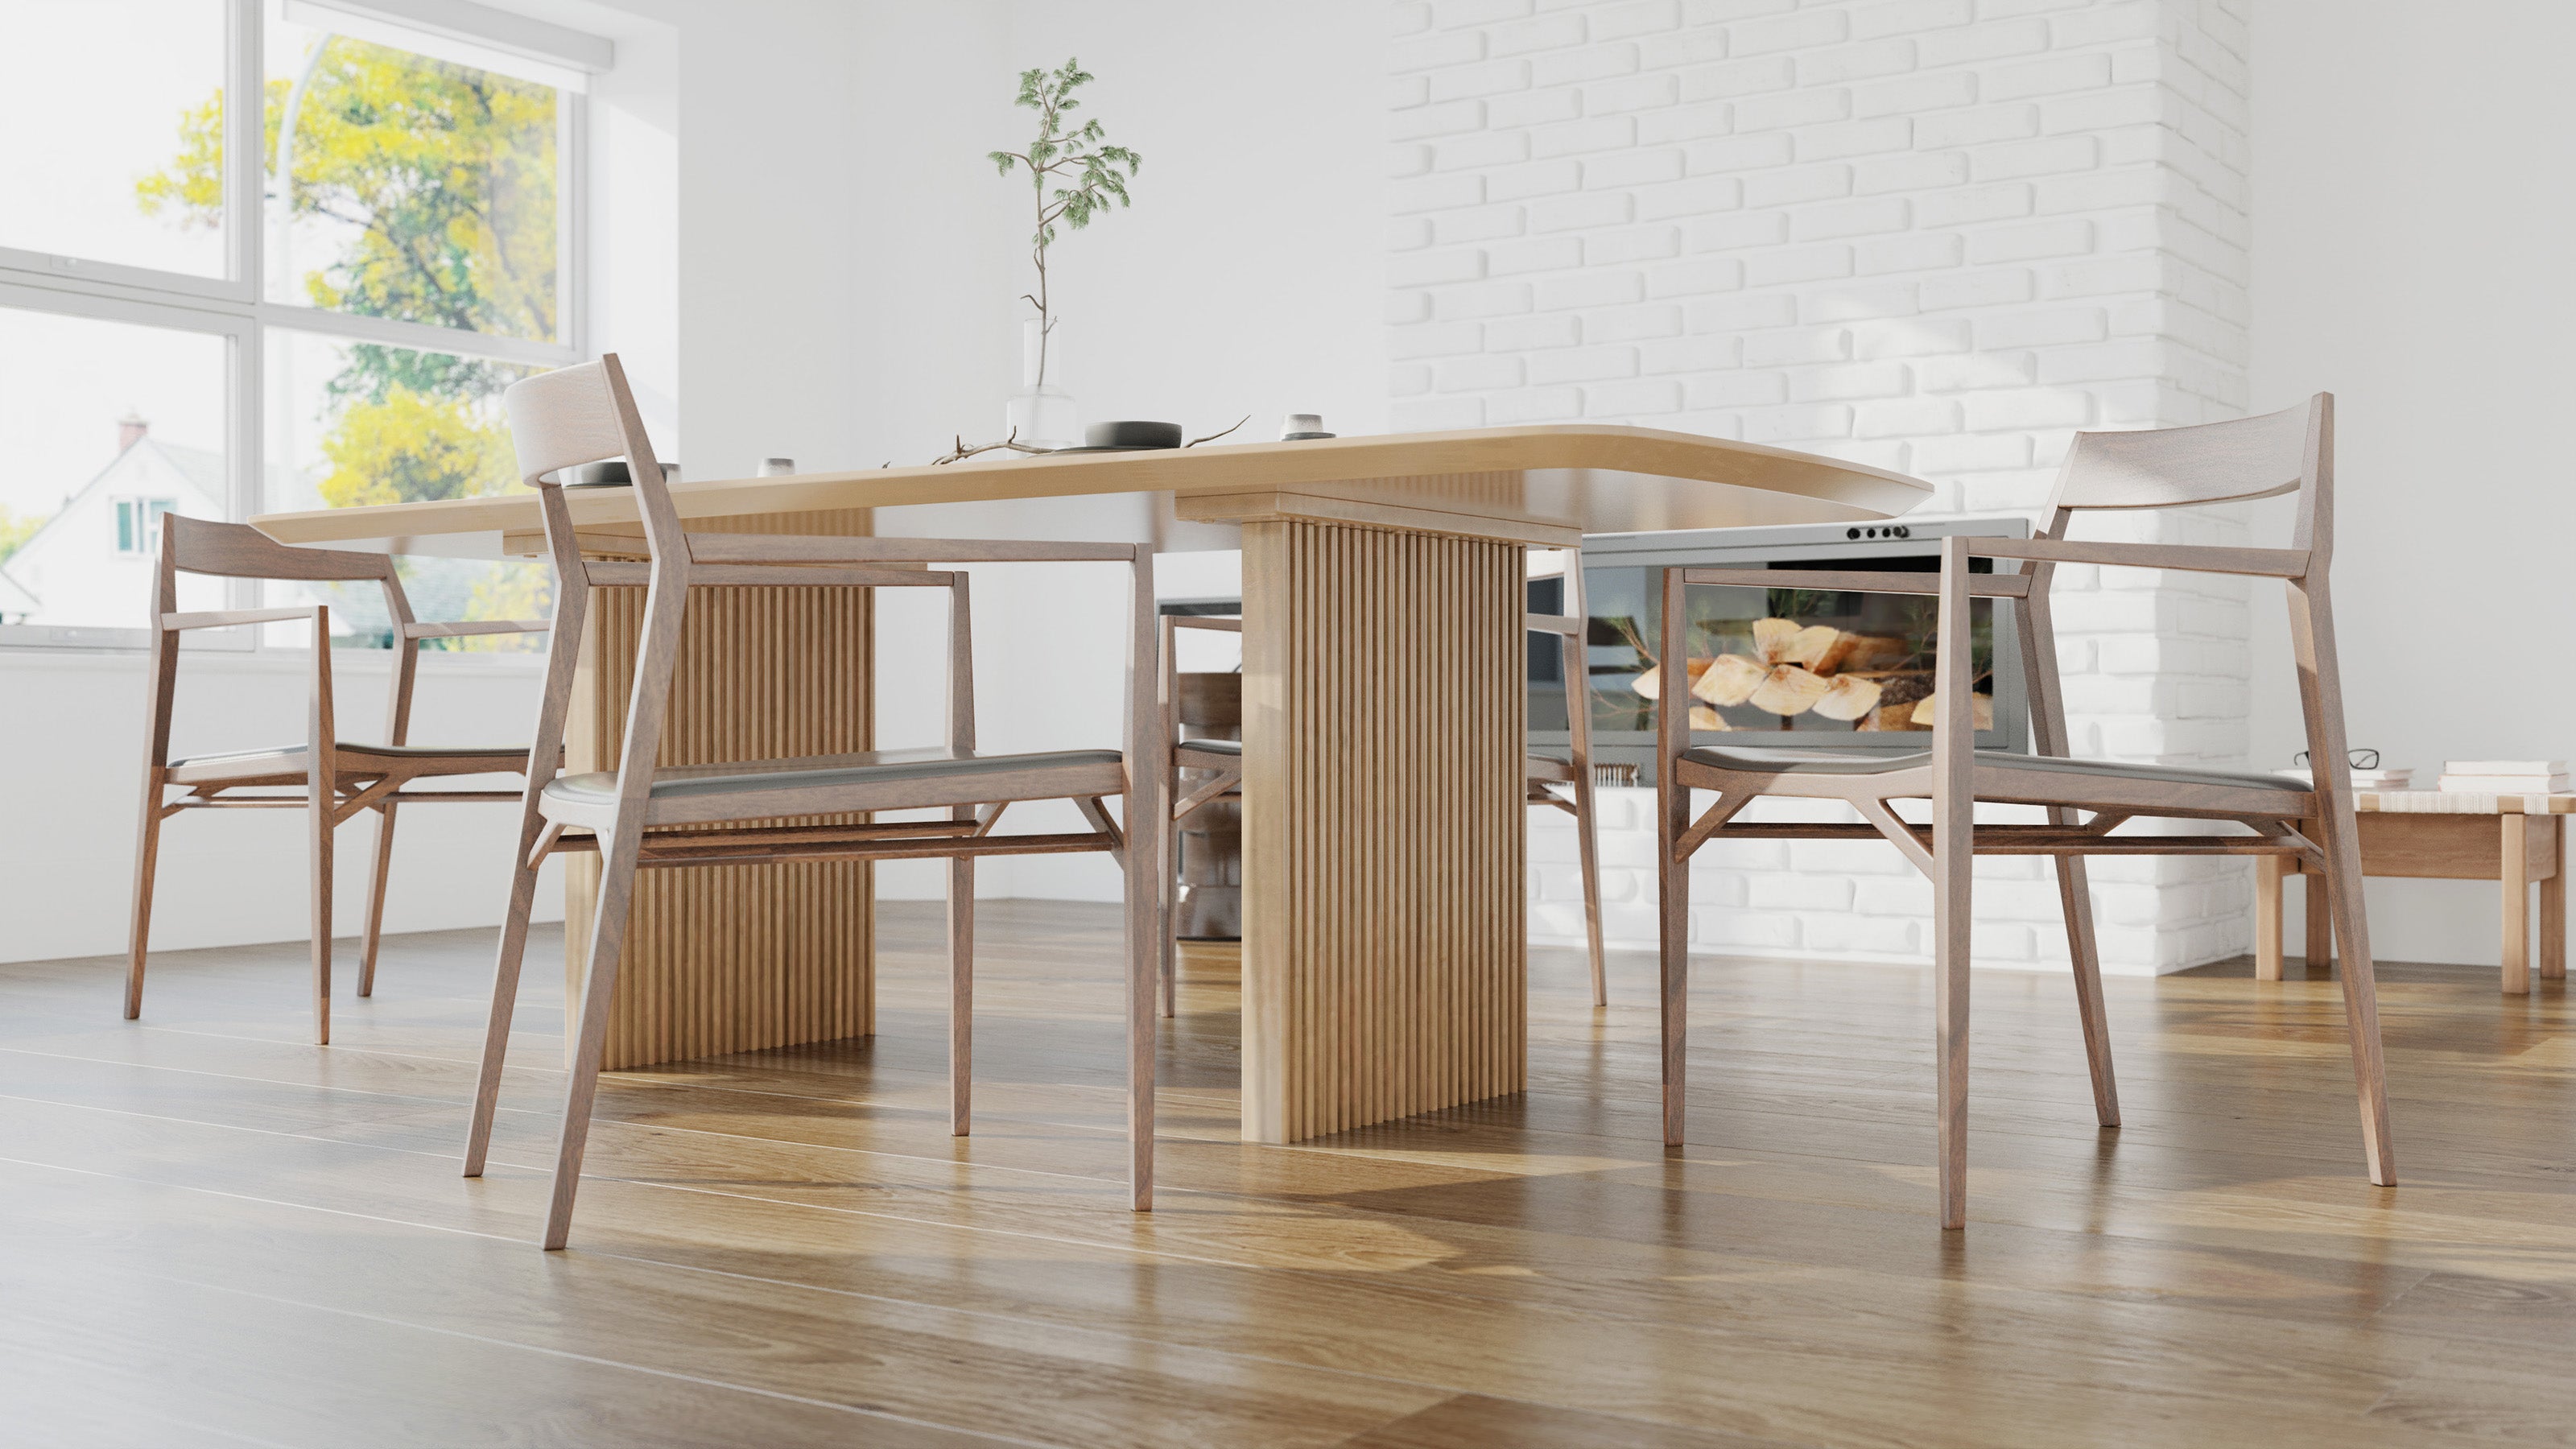 Shop the Trend: Unique Dining Tables for Discerning Buyers